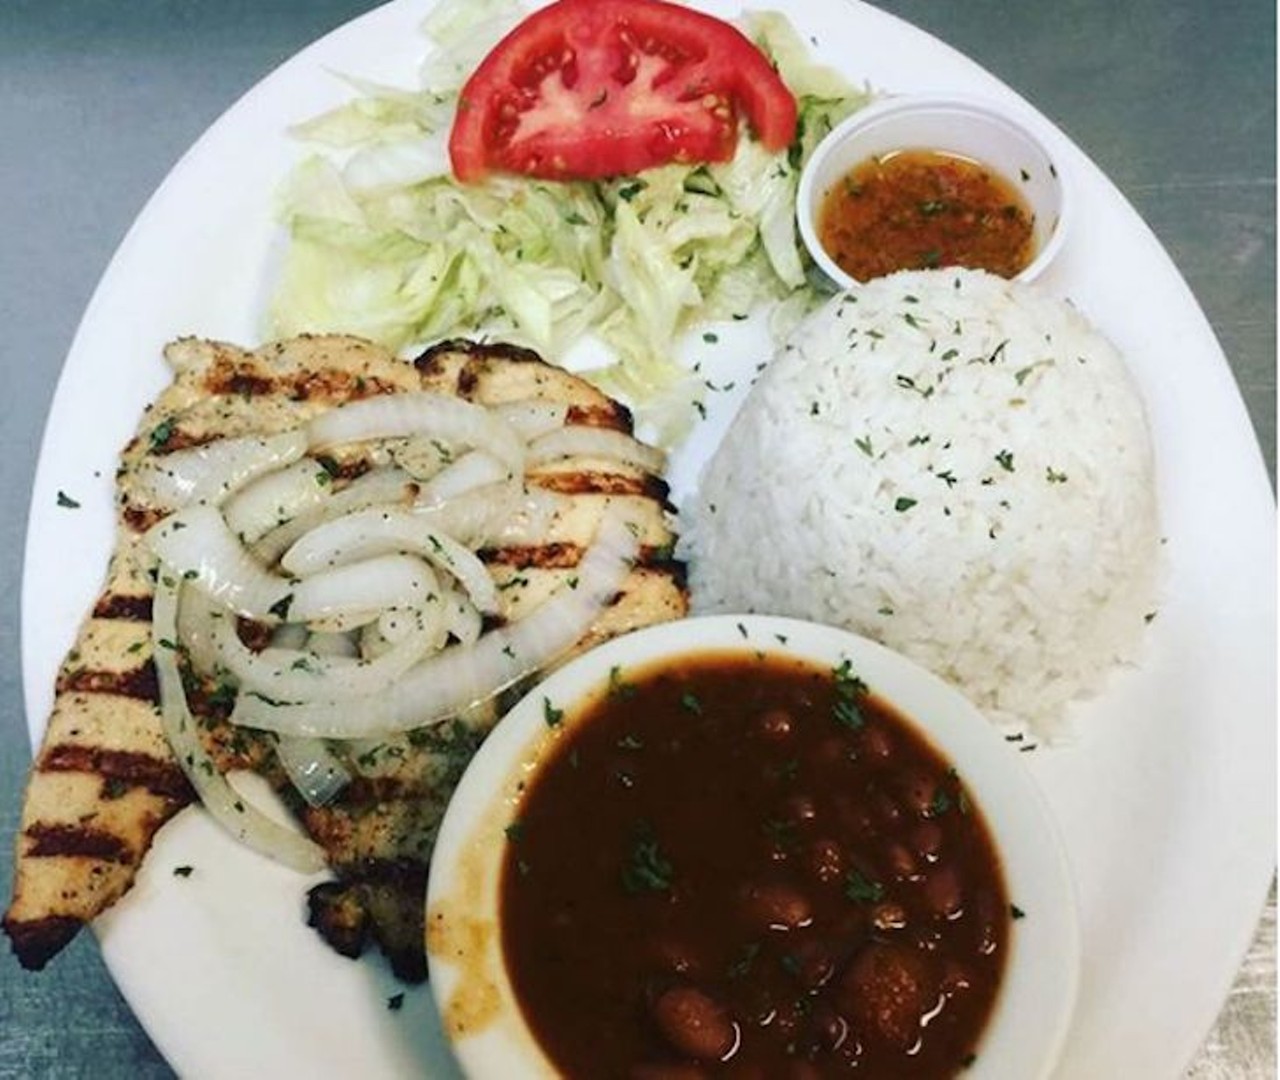 Crazy Pollo
5756 Dahlia Dr., (407) 277-0926
Fresh, juicy and crisp, the fried yuca here is a must. You can&#146;t go wrong with the mofongo or carne frita either.
Photo via crazypollo.orlando/Instagram